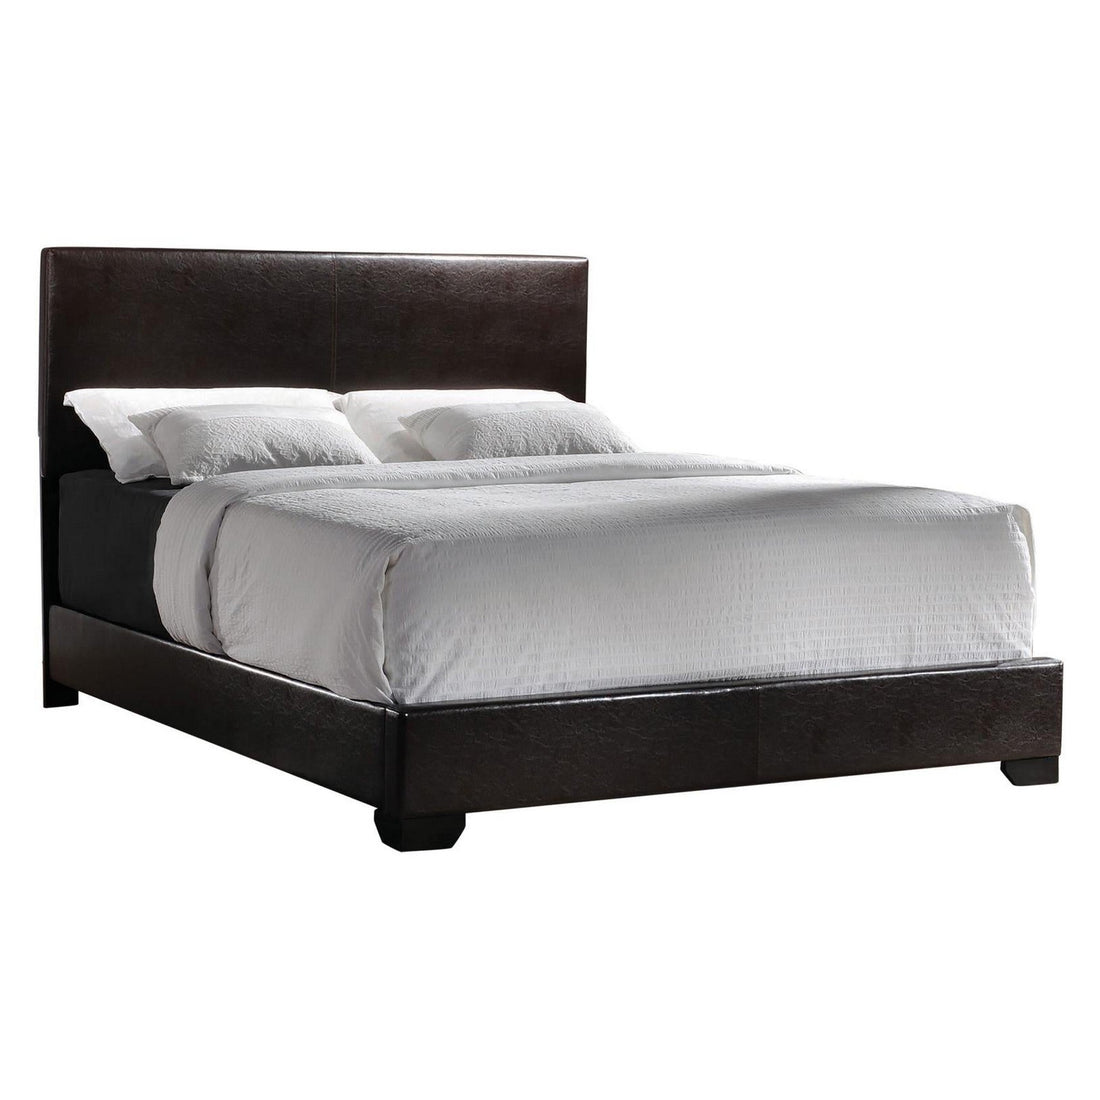 Conner Queen Upholstered Panel Bed Black and Dark Brown 300261Q